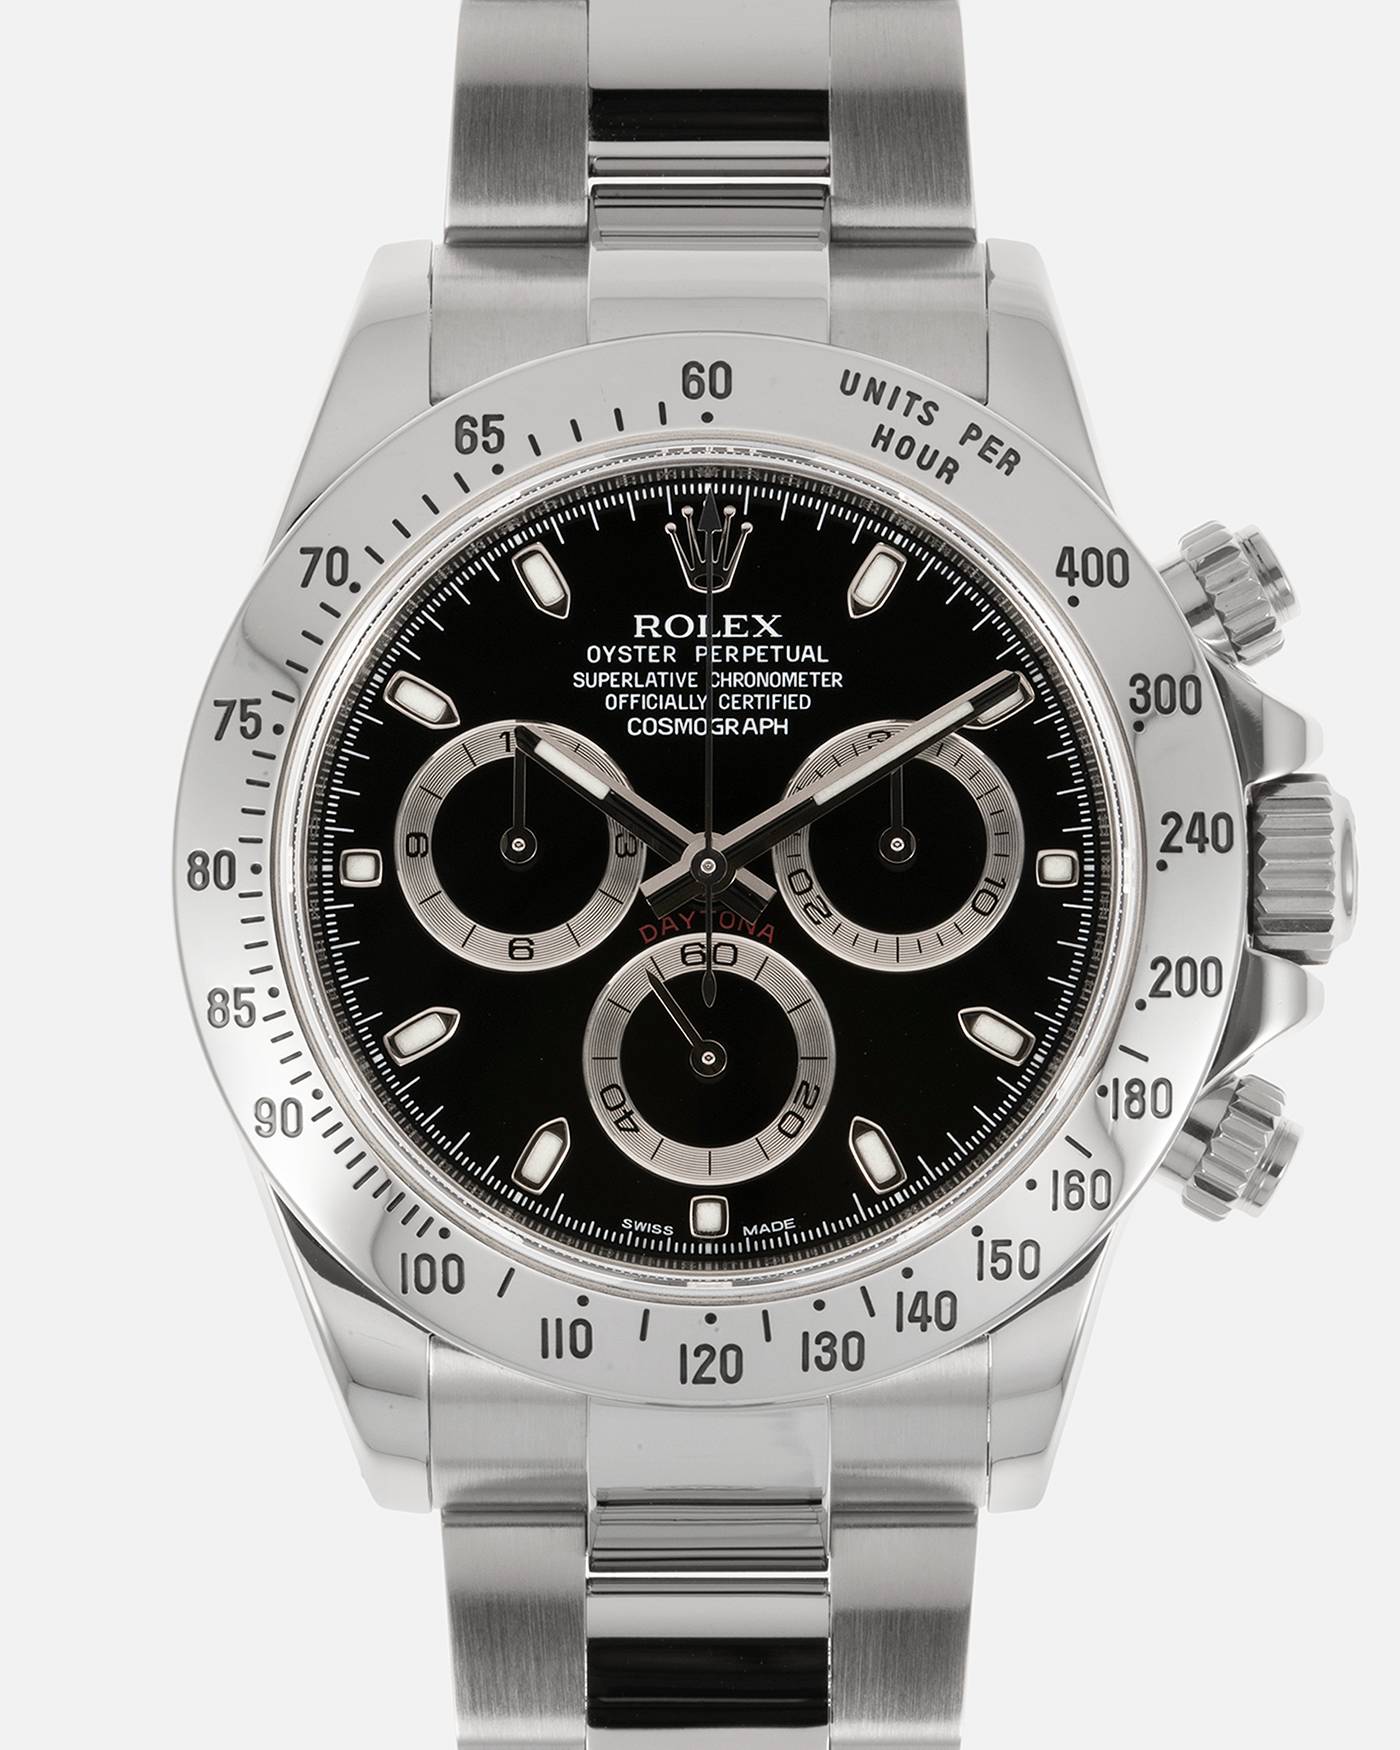 Brand: Rolex Year: 2010s Model: Cosmograph Daytona Reference: 116520 Material: Stainless Steel Movement: Rolex Cal. 4130, Self-Winding Case Diameter: 40mm Lug Width: 20mm Strap: Rolex Stainless Steel Oyster Bracelet with Signed Deployant Clasp